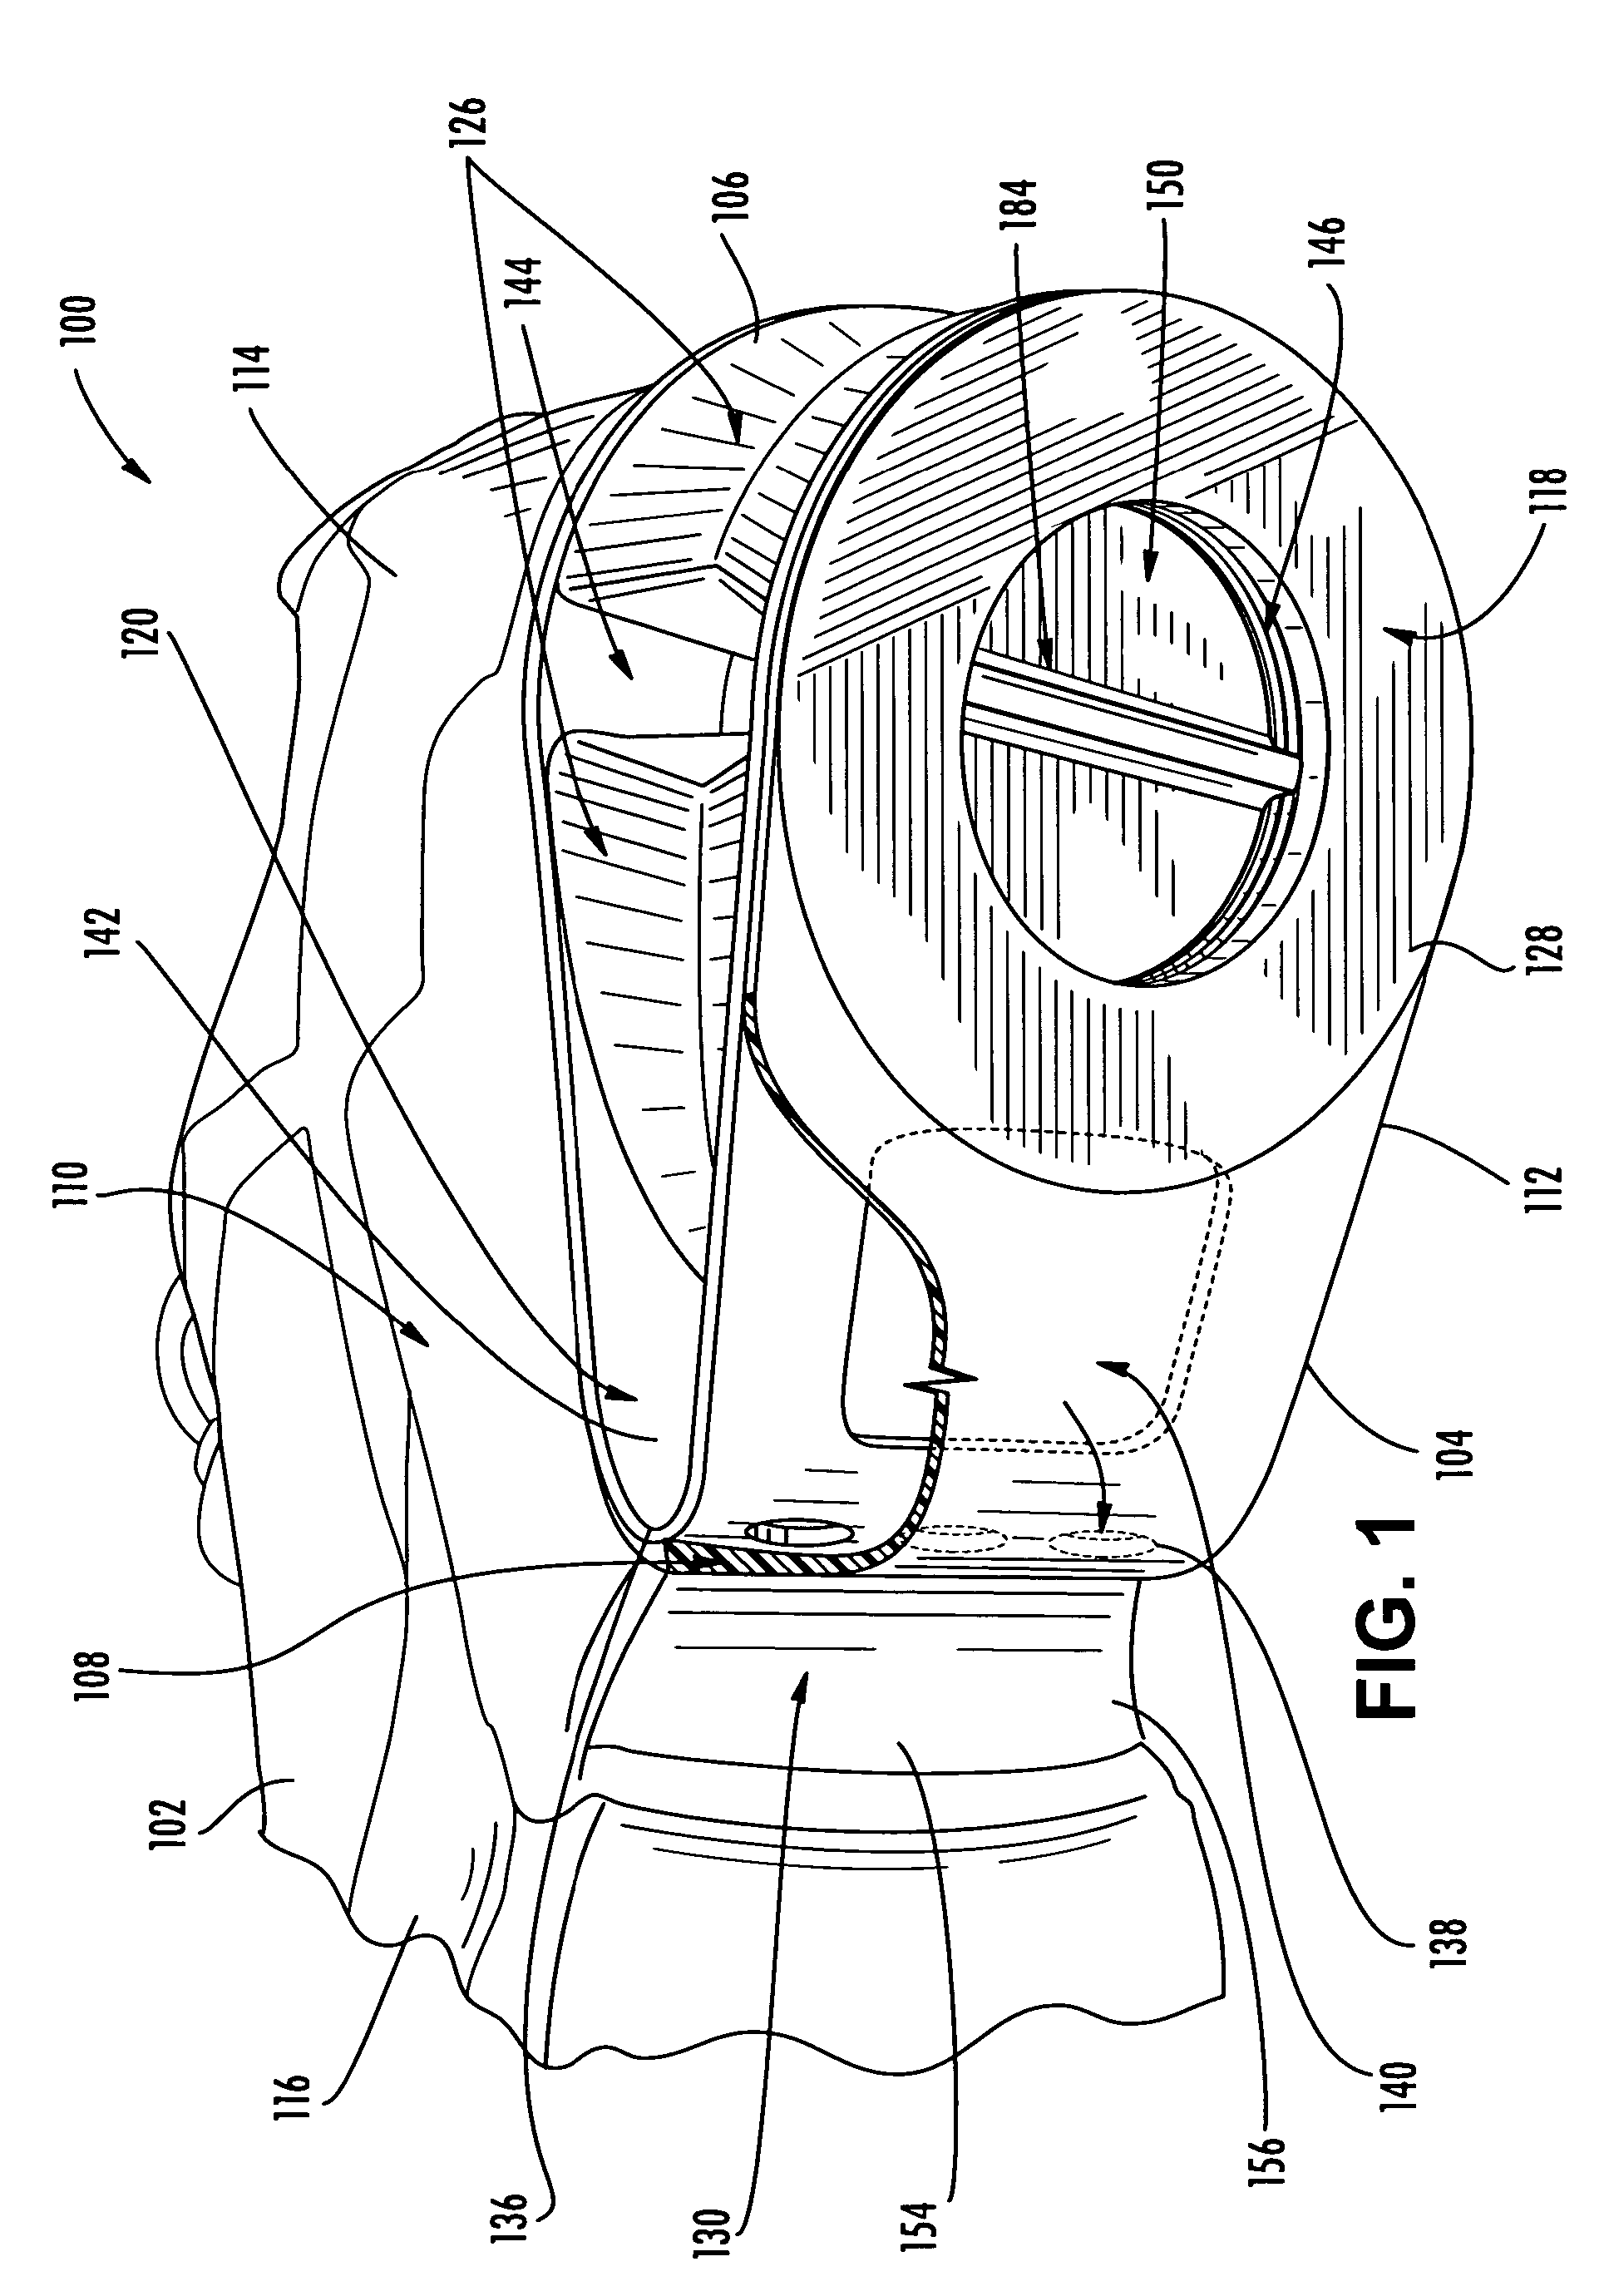 Athletic shoe with removable resilient element